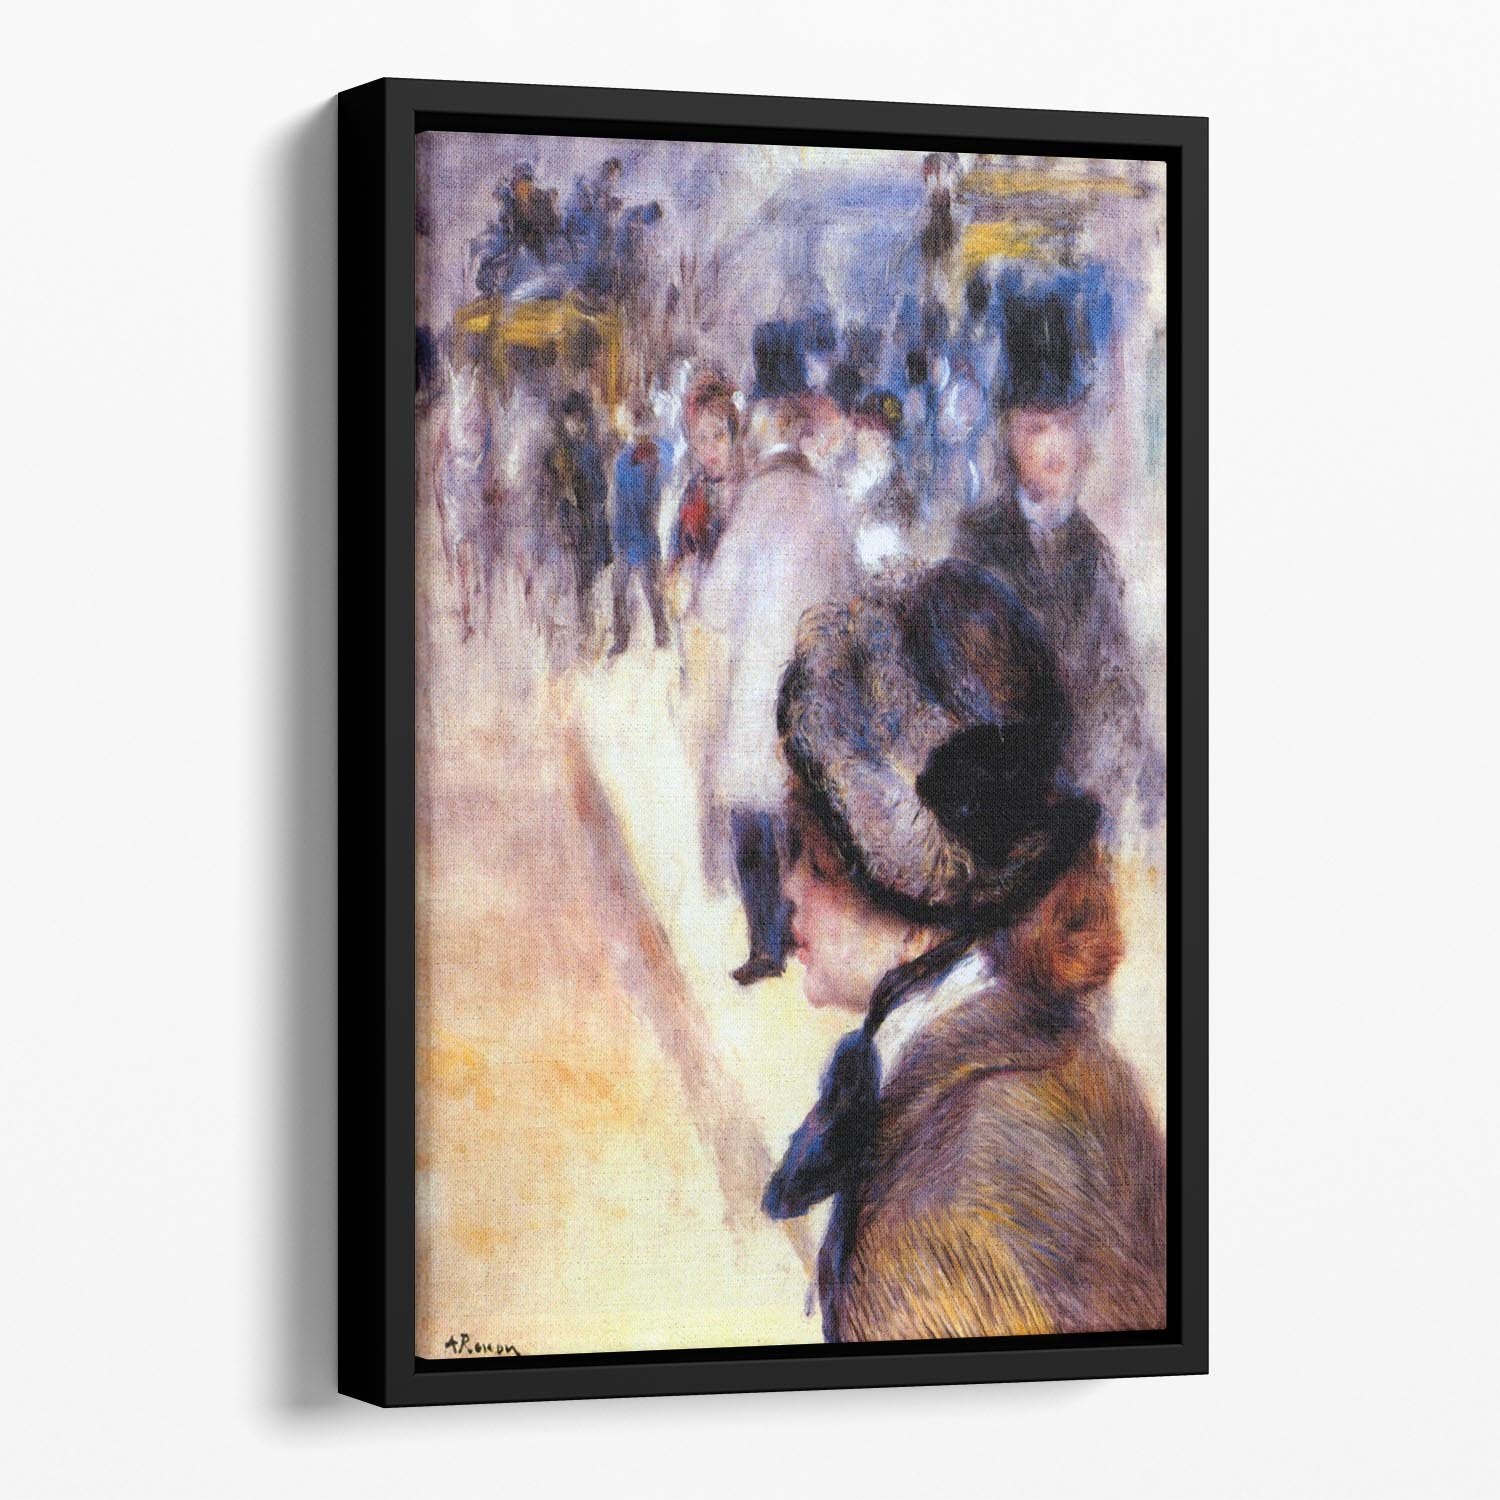 The place Clichy by Renoir Floating Framed Canvas